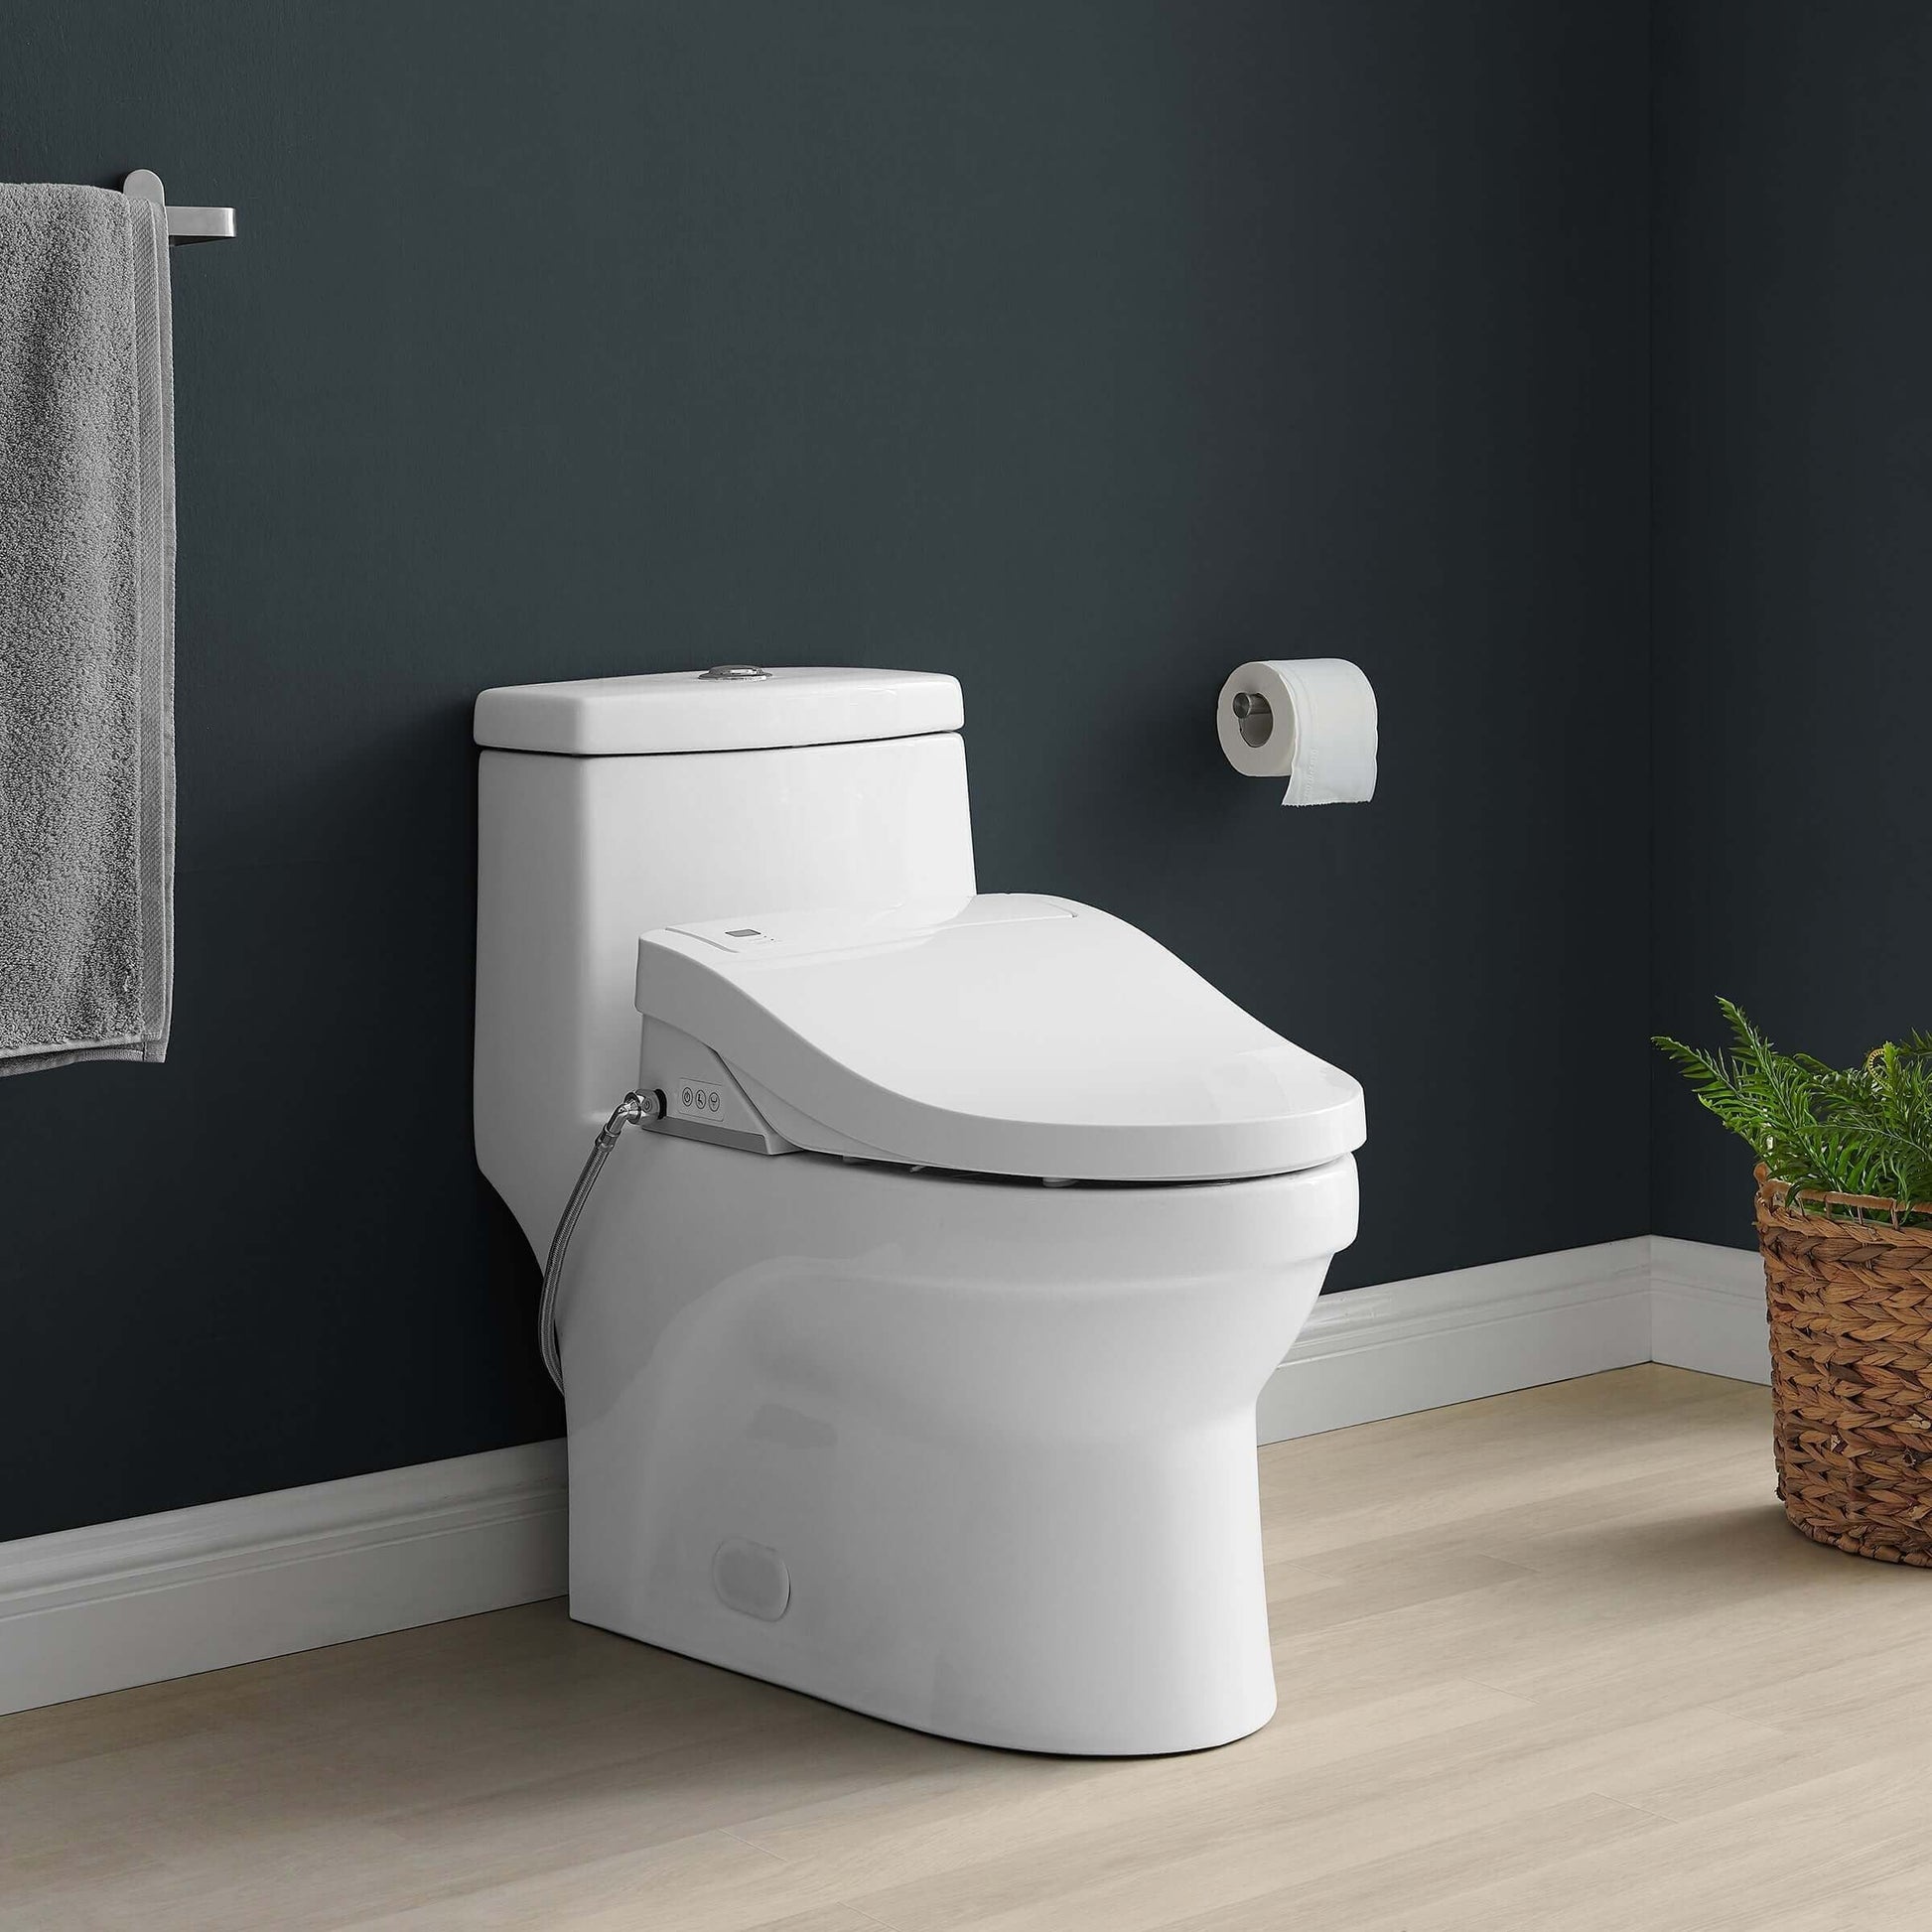 Vivante Smart Toilet Seat Bidet - side angled view attached to a toilet in a bathroom